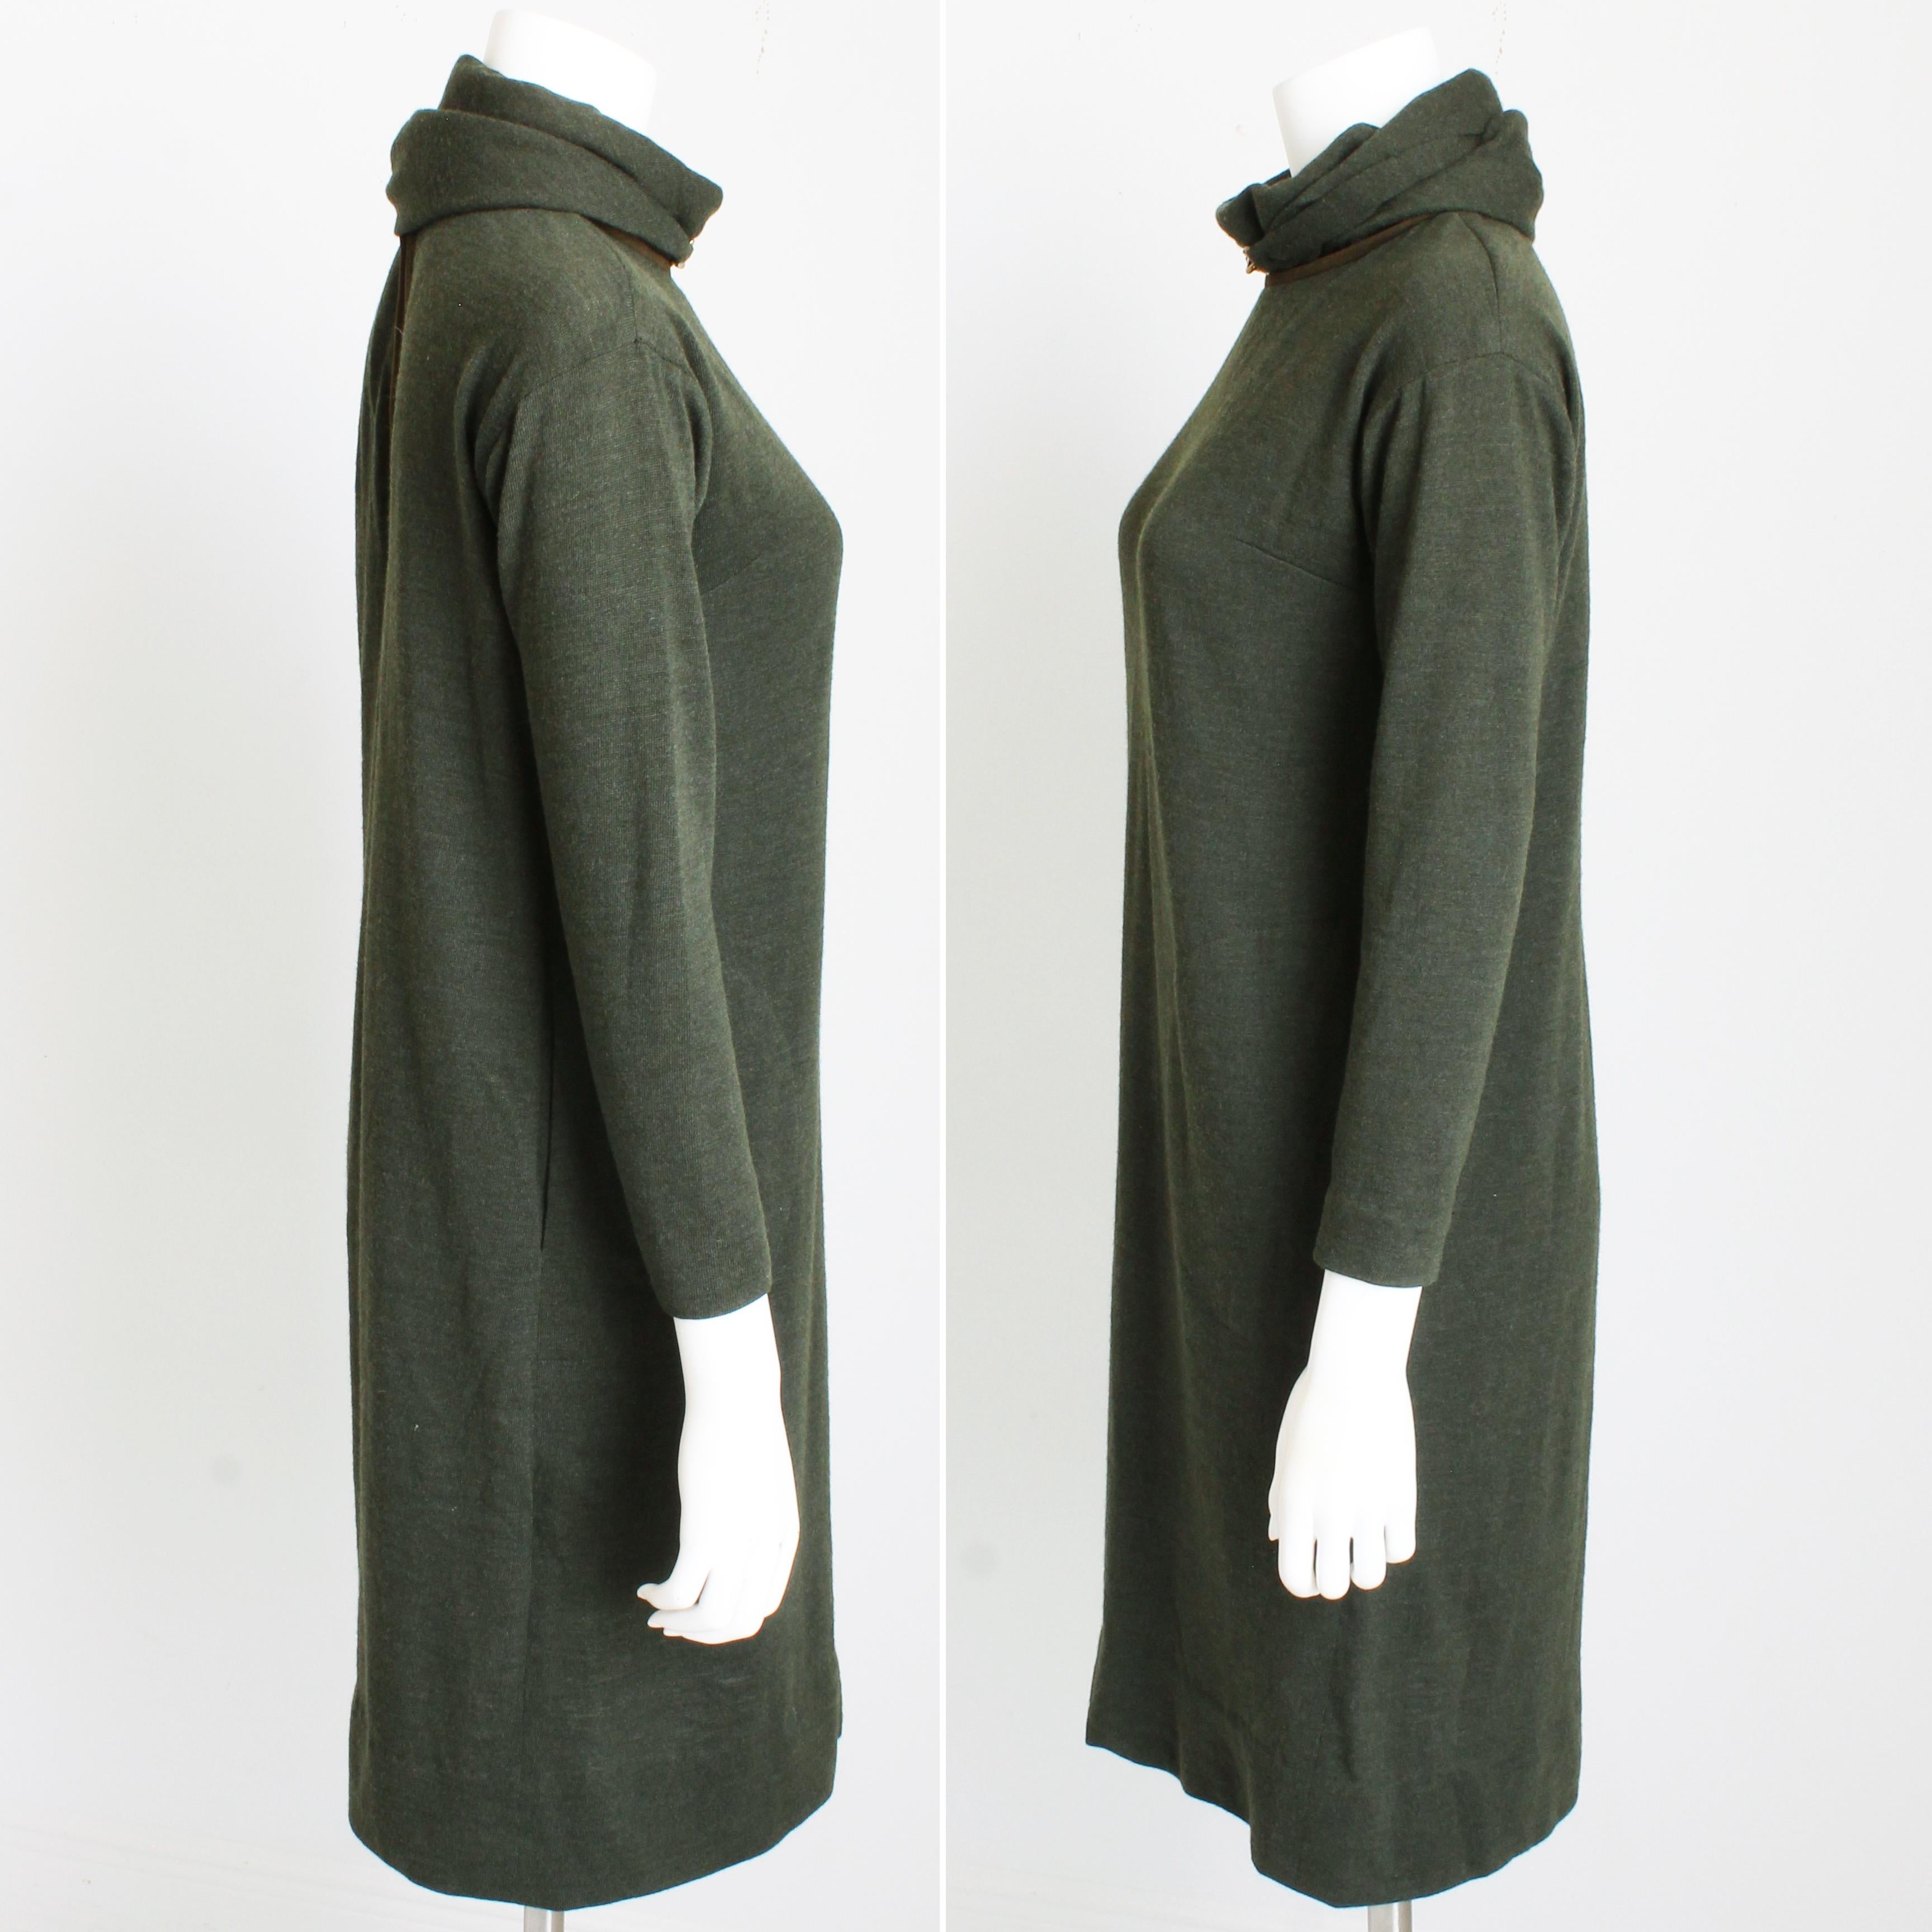 Bonnie Cashin for Sills Wool Knit Dress with Dog Leash Clasp Loden 60s Mod Sz 12 For Sale 4